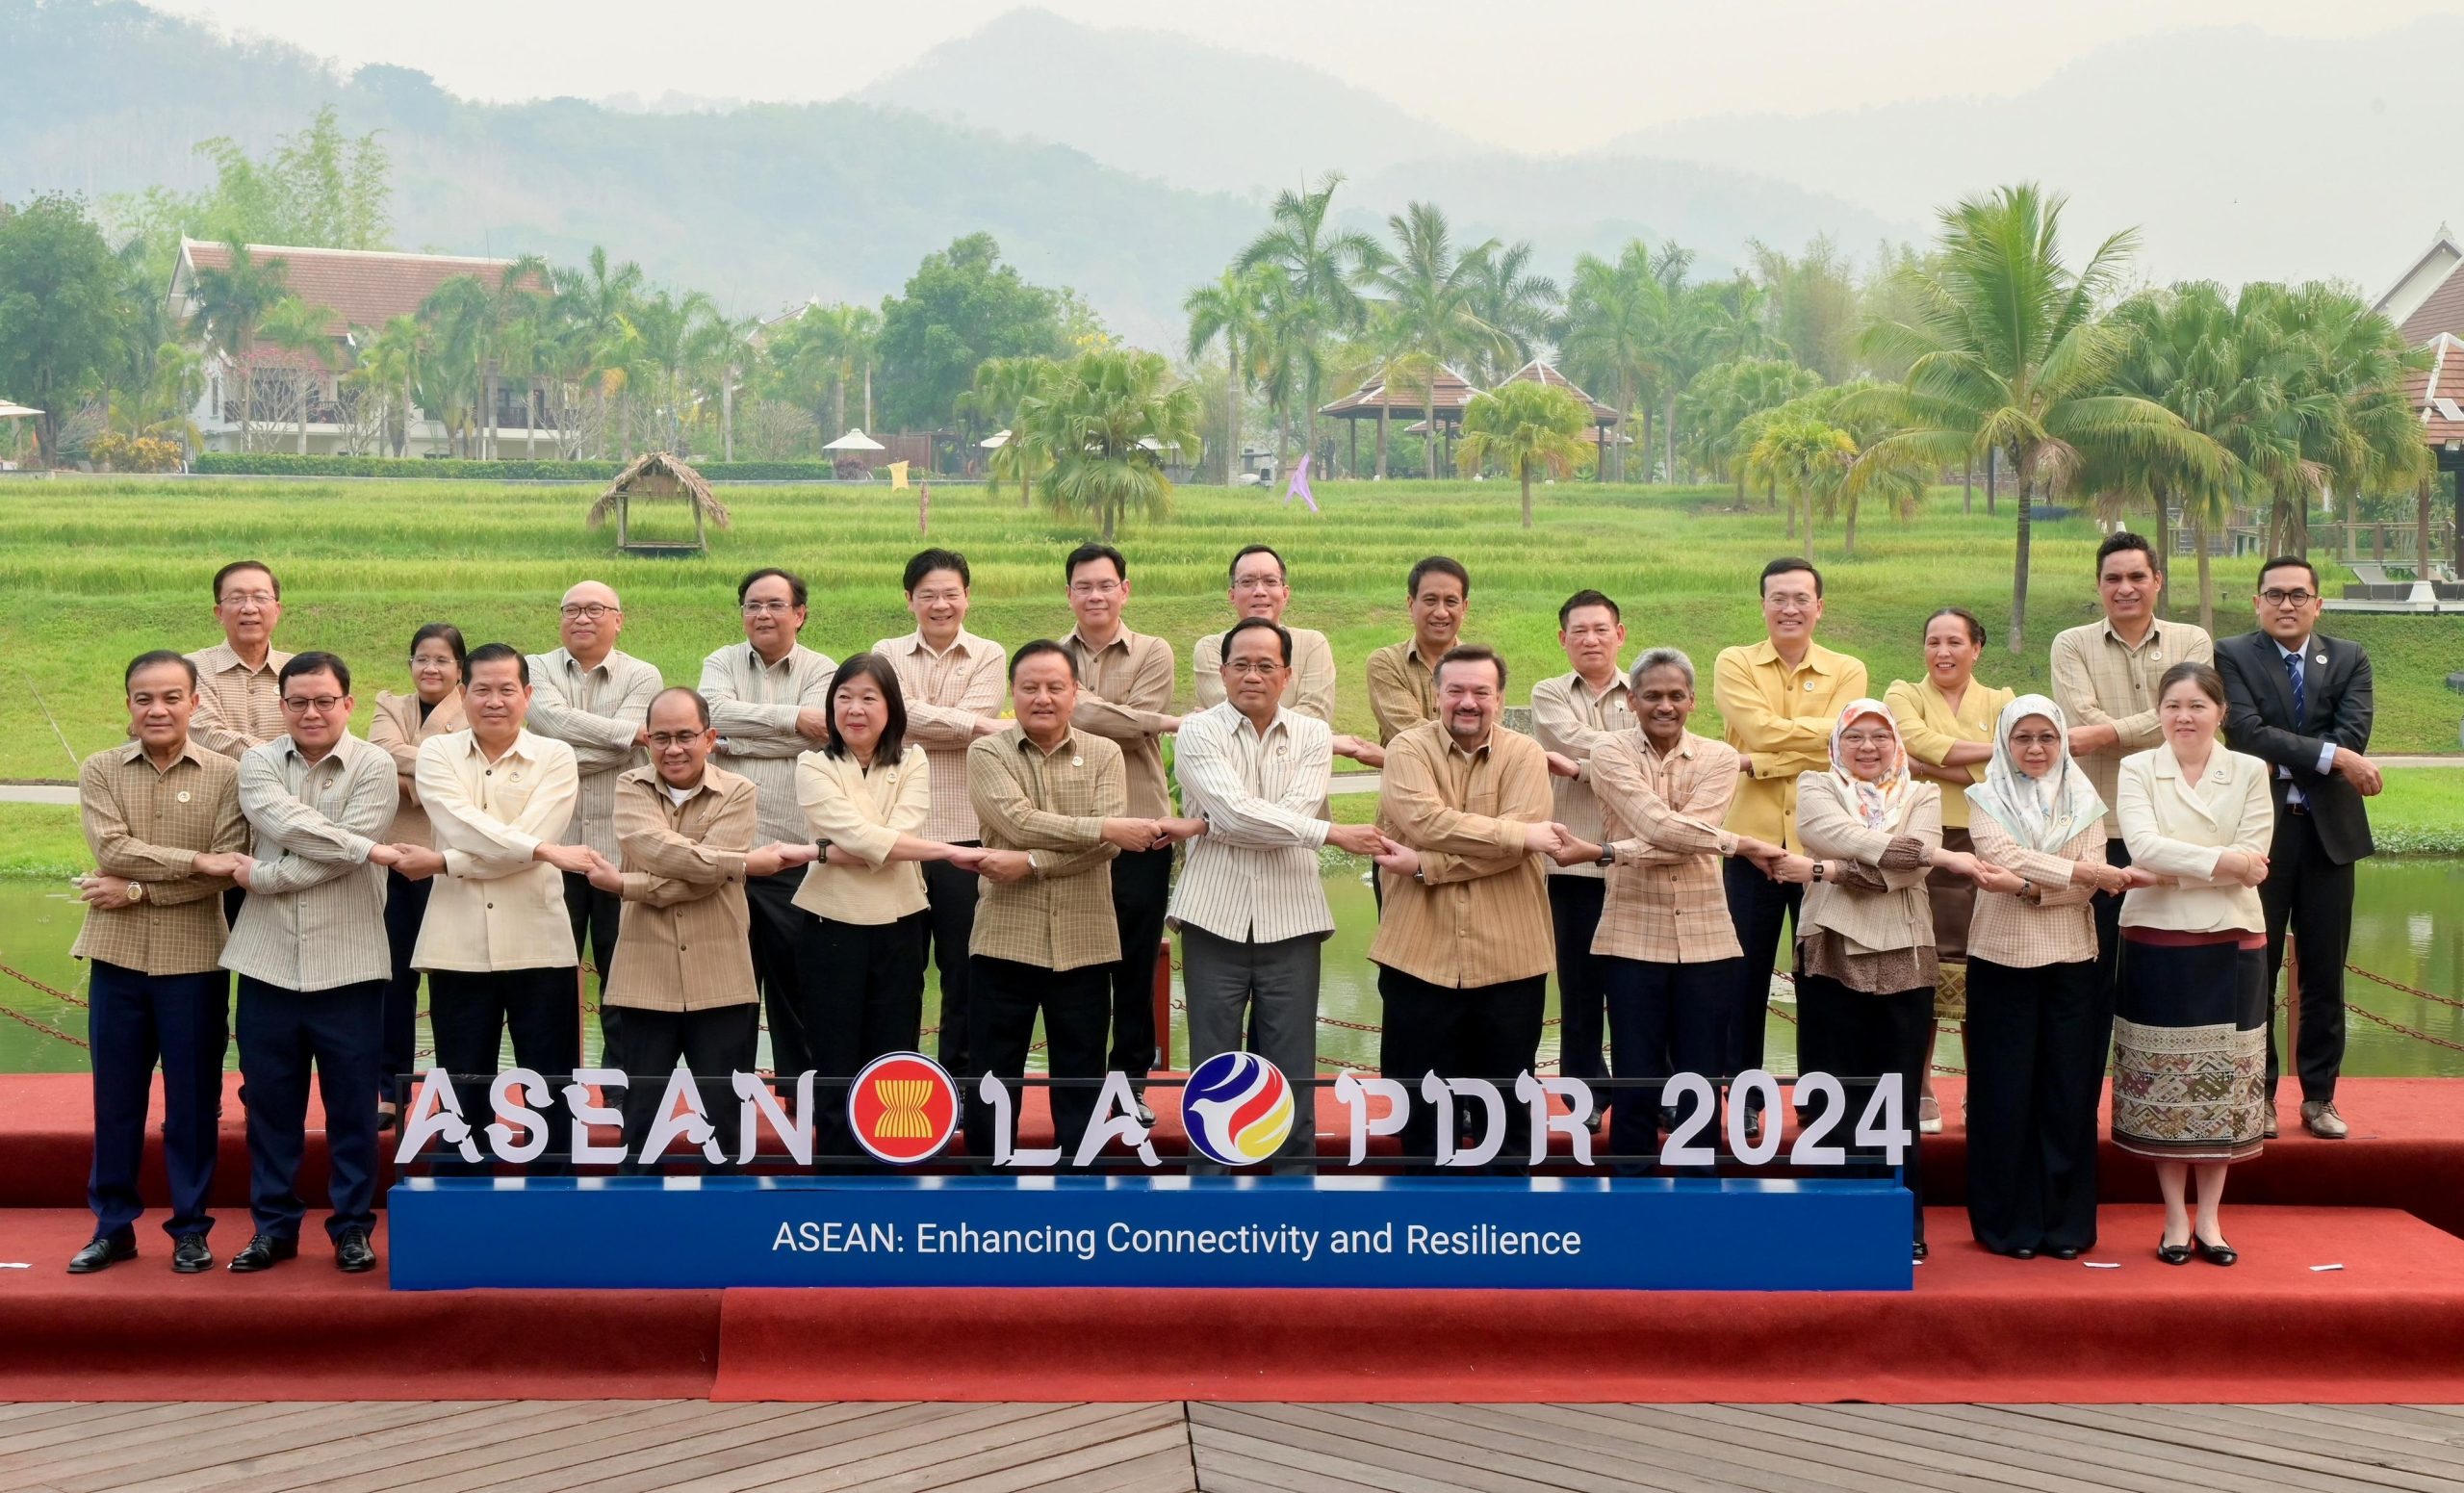 JOINT STATEMENT OF THE 11TH ASEAN FINANCE MINISTERS’AND CENTRAL BANK GOVERNORS’ MEETING (AFMGM), LUANG PRABANG, LAO PDR, 5 April 2024, Luang Prabang, Lao PDR